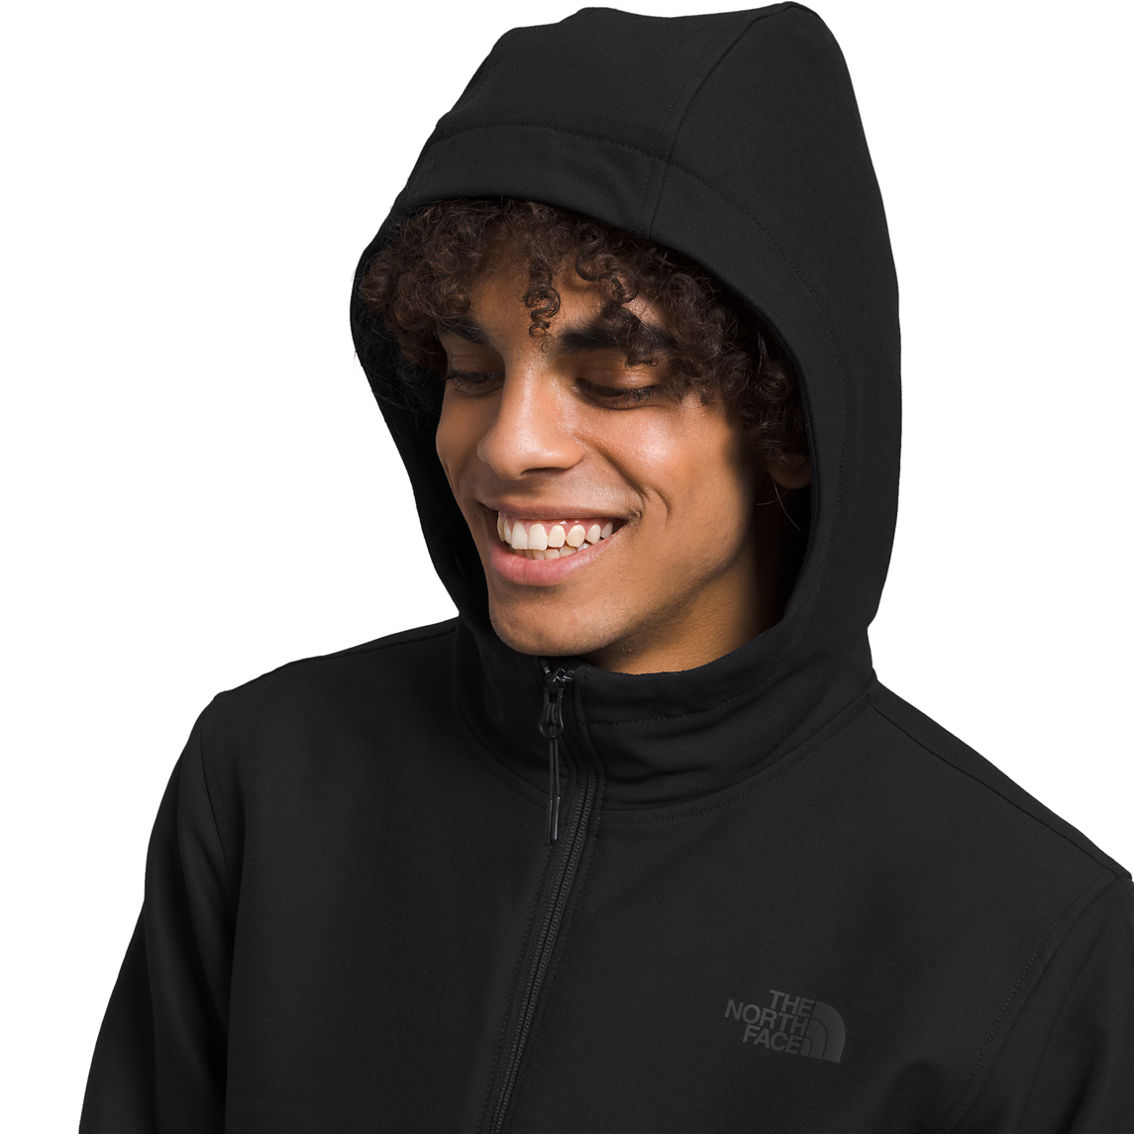 The North Face Camden Thermal Hoodie | Hoodies & Jackets | Clothing ...